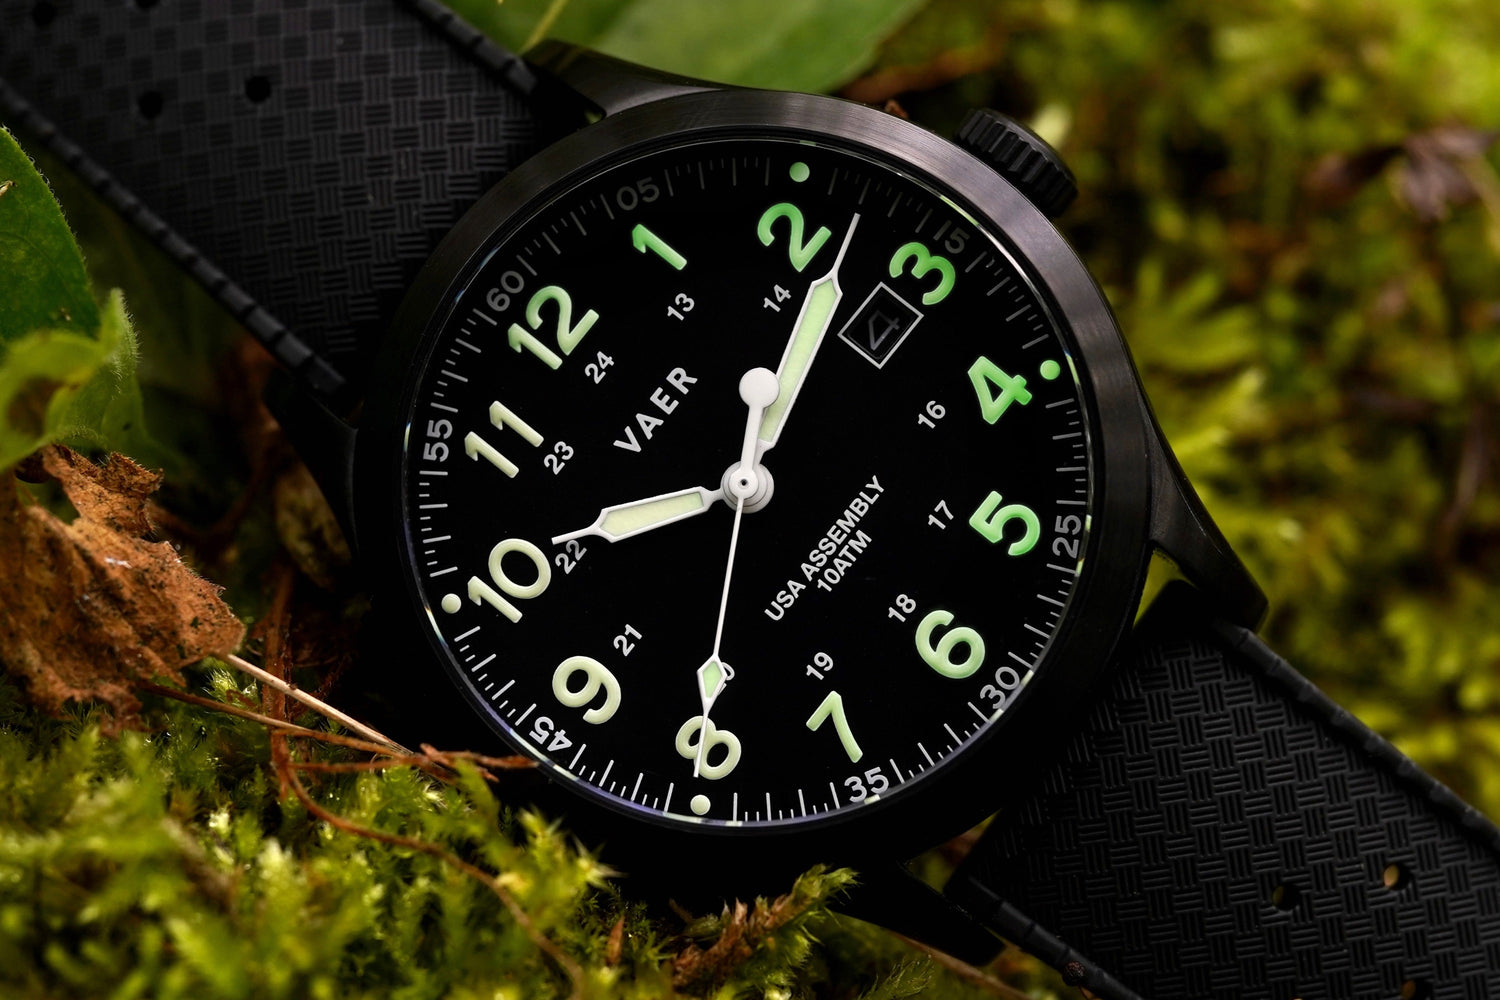 Why does Lume Paint matter in watches?